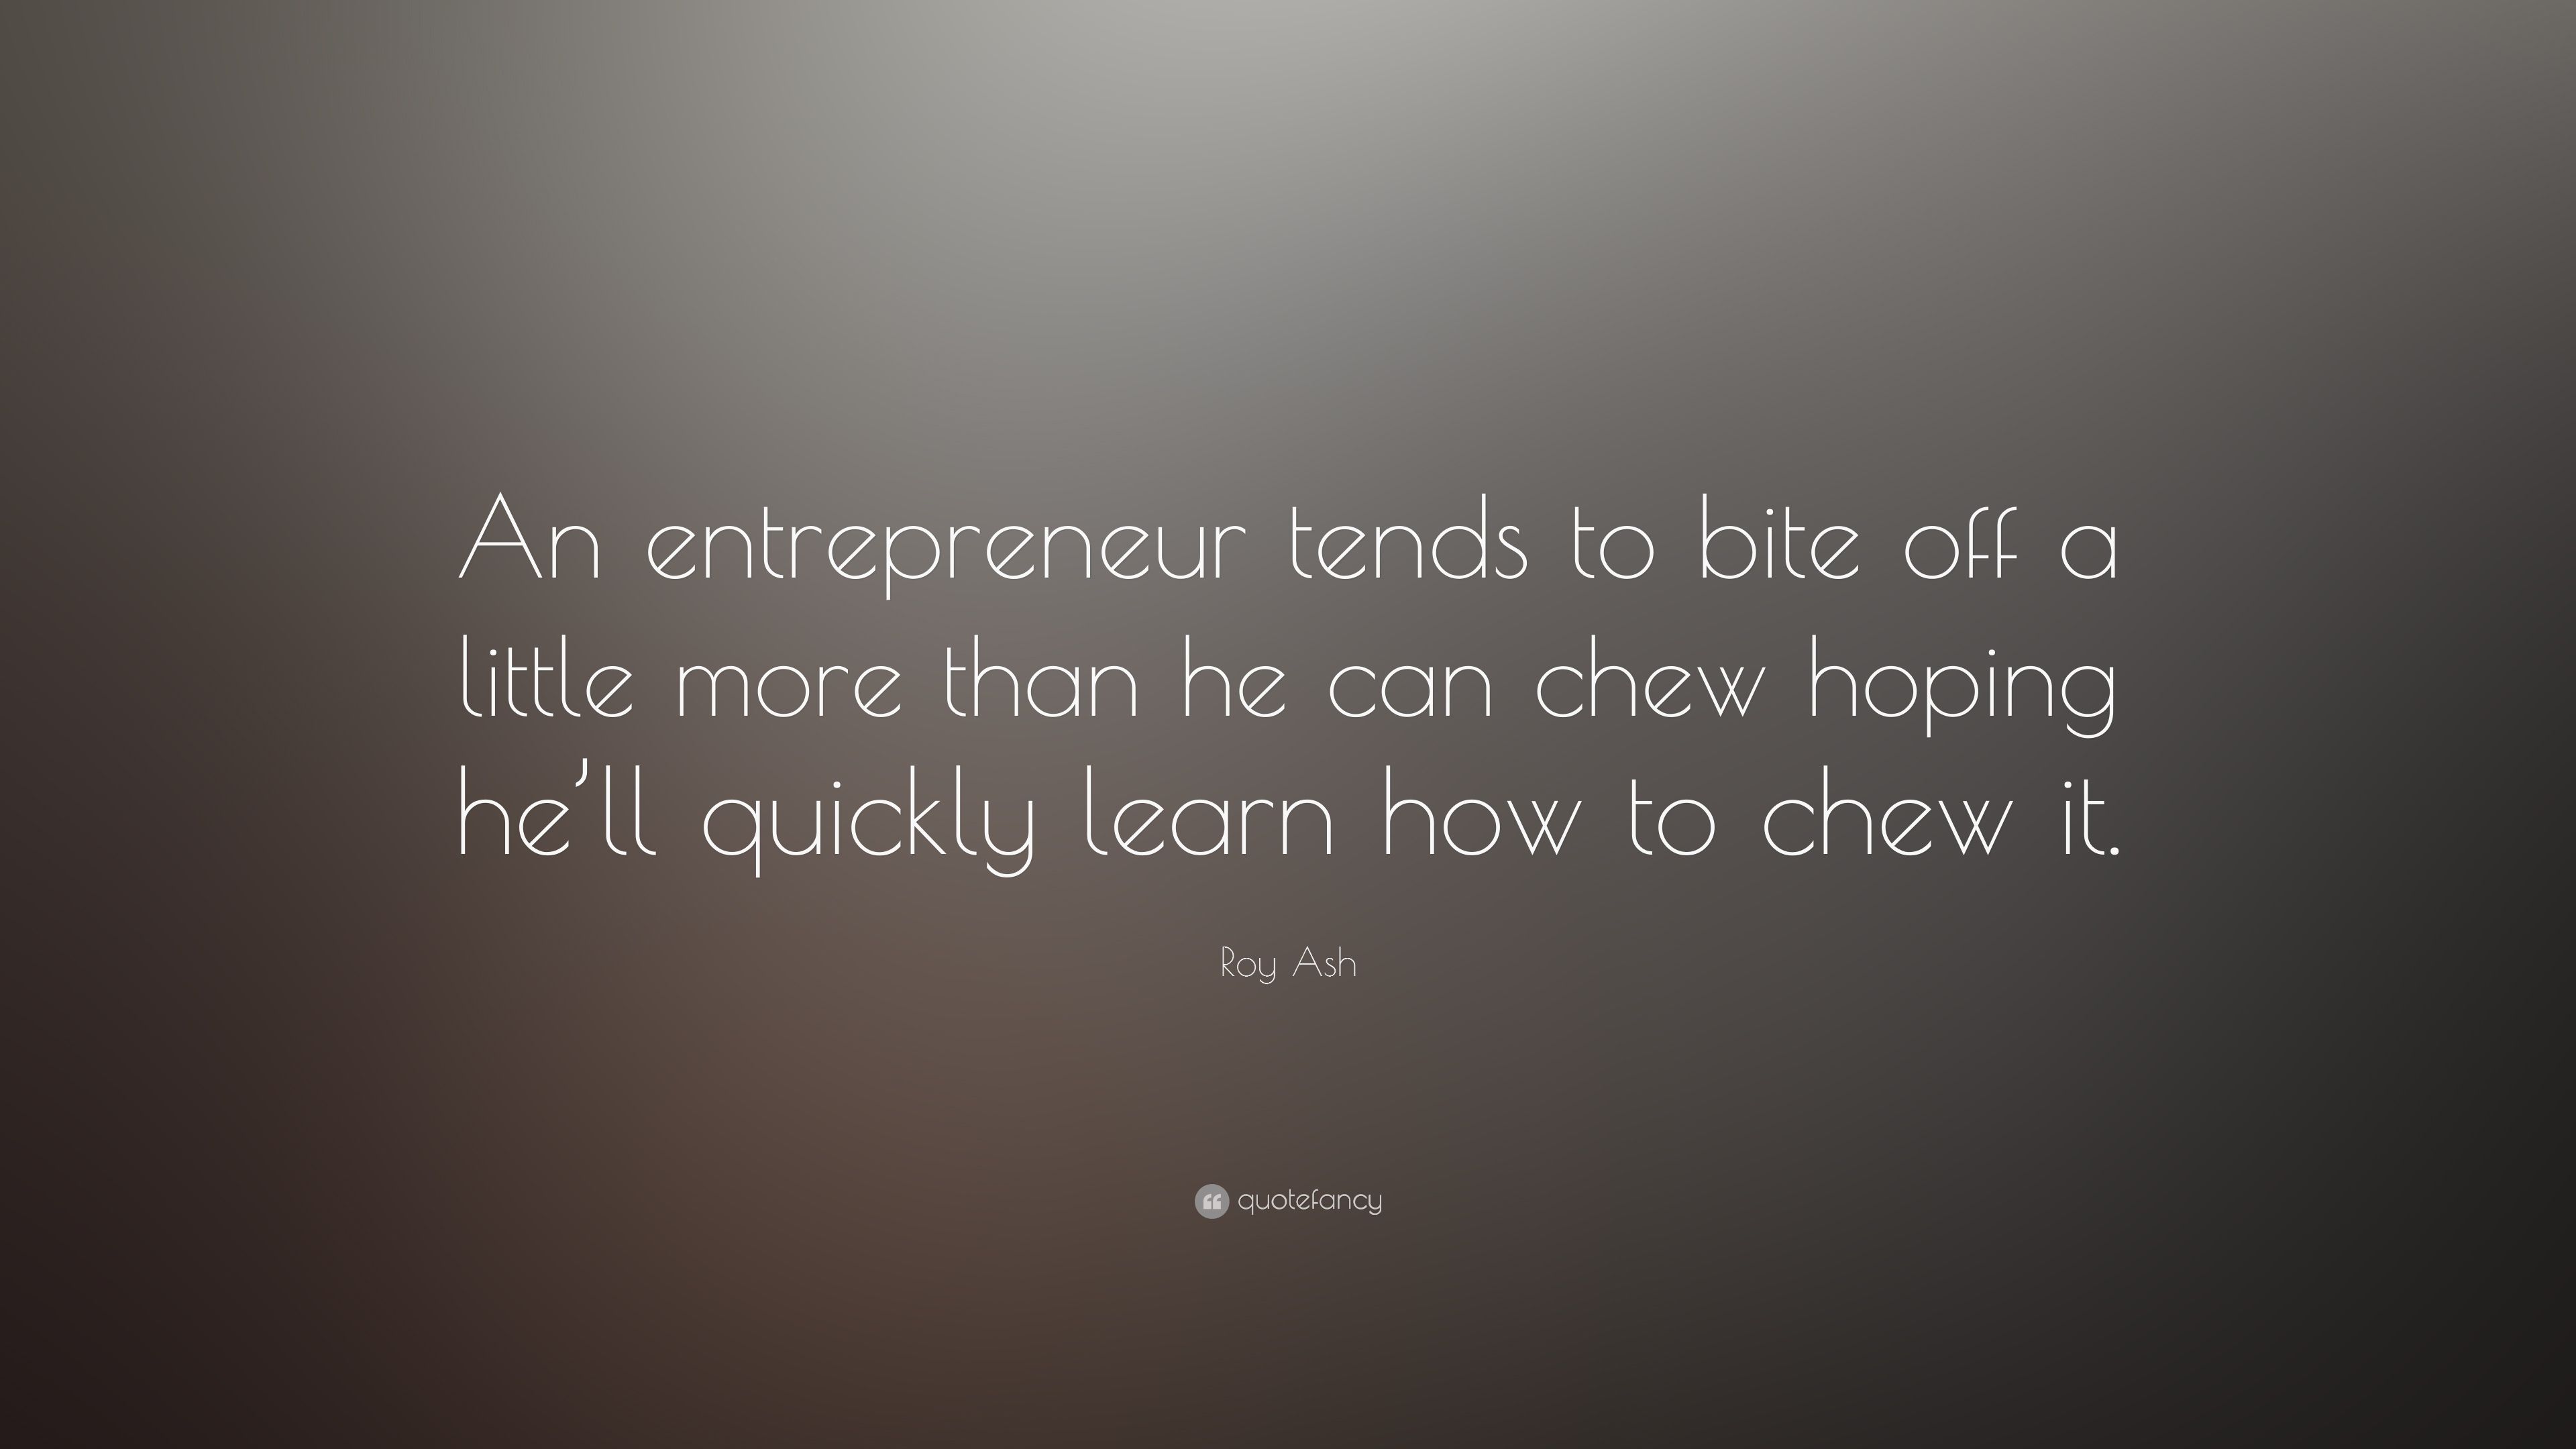 Roy Ash Quote: “An entrepreneur tends to bite off a little more